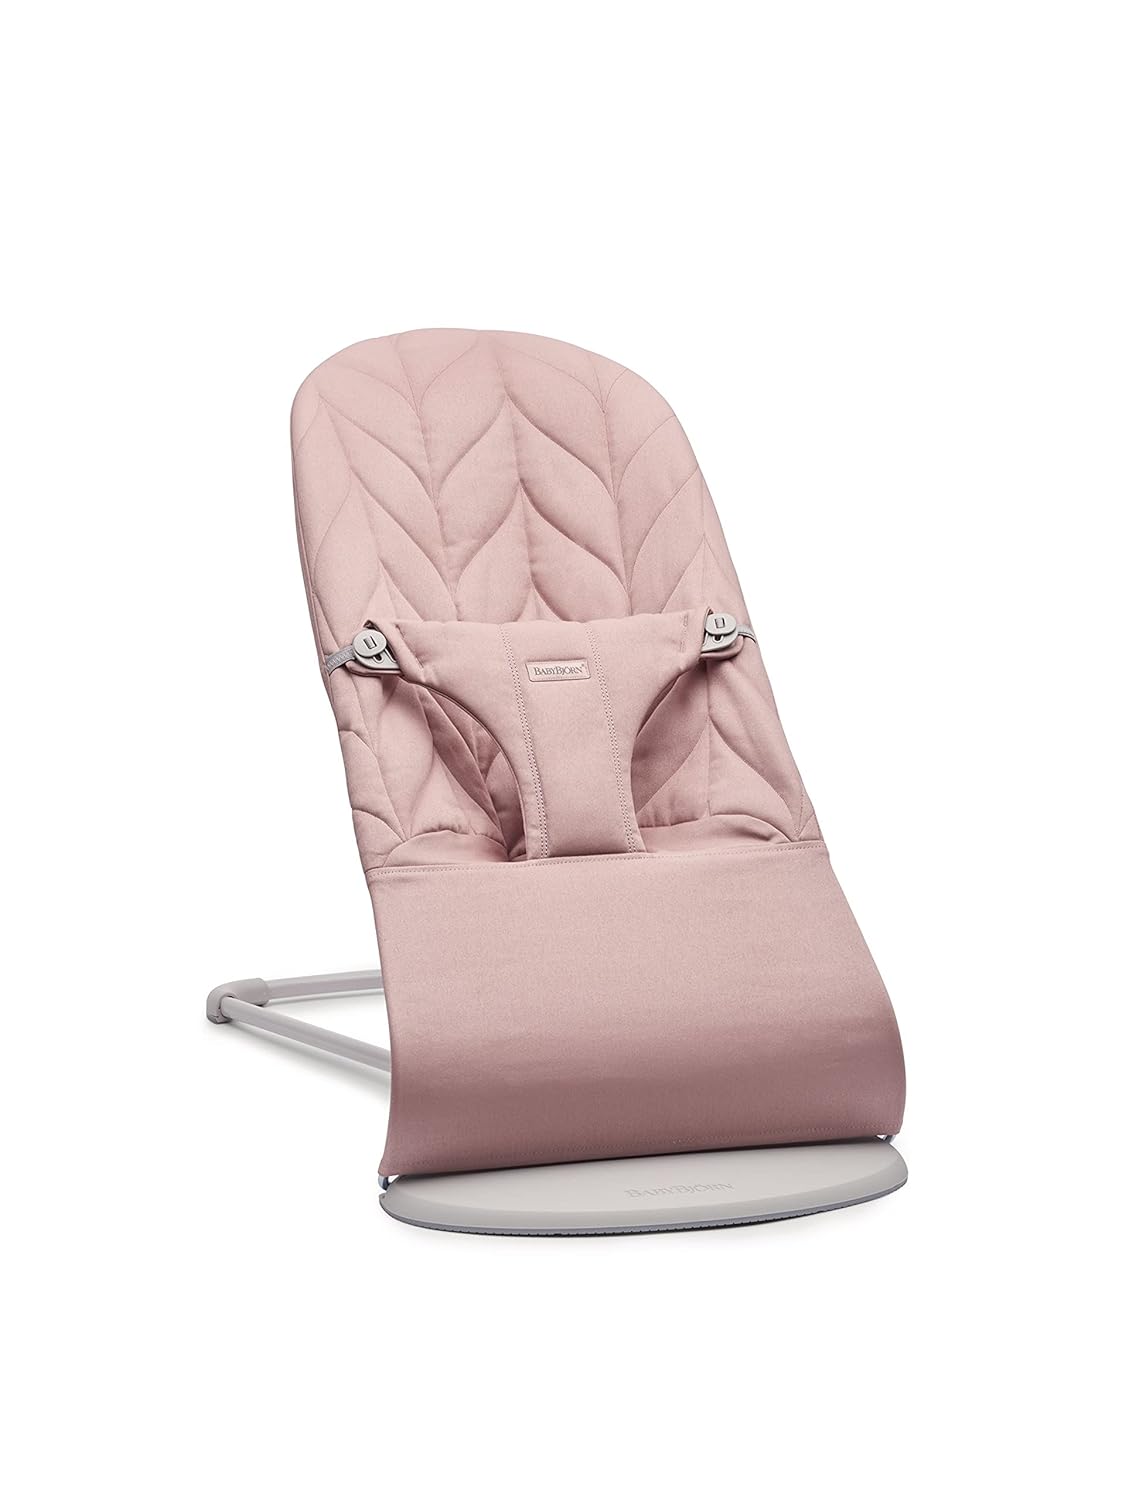 BABYBJÖRN Bliss Light Grey Cotton Baby Rocker with Petal Quilting (Dusky Pink)